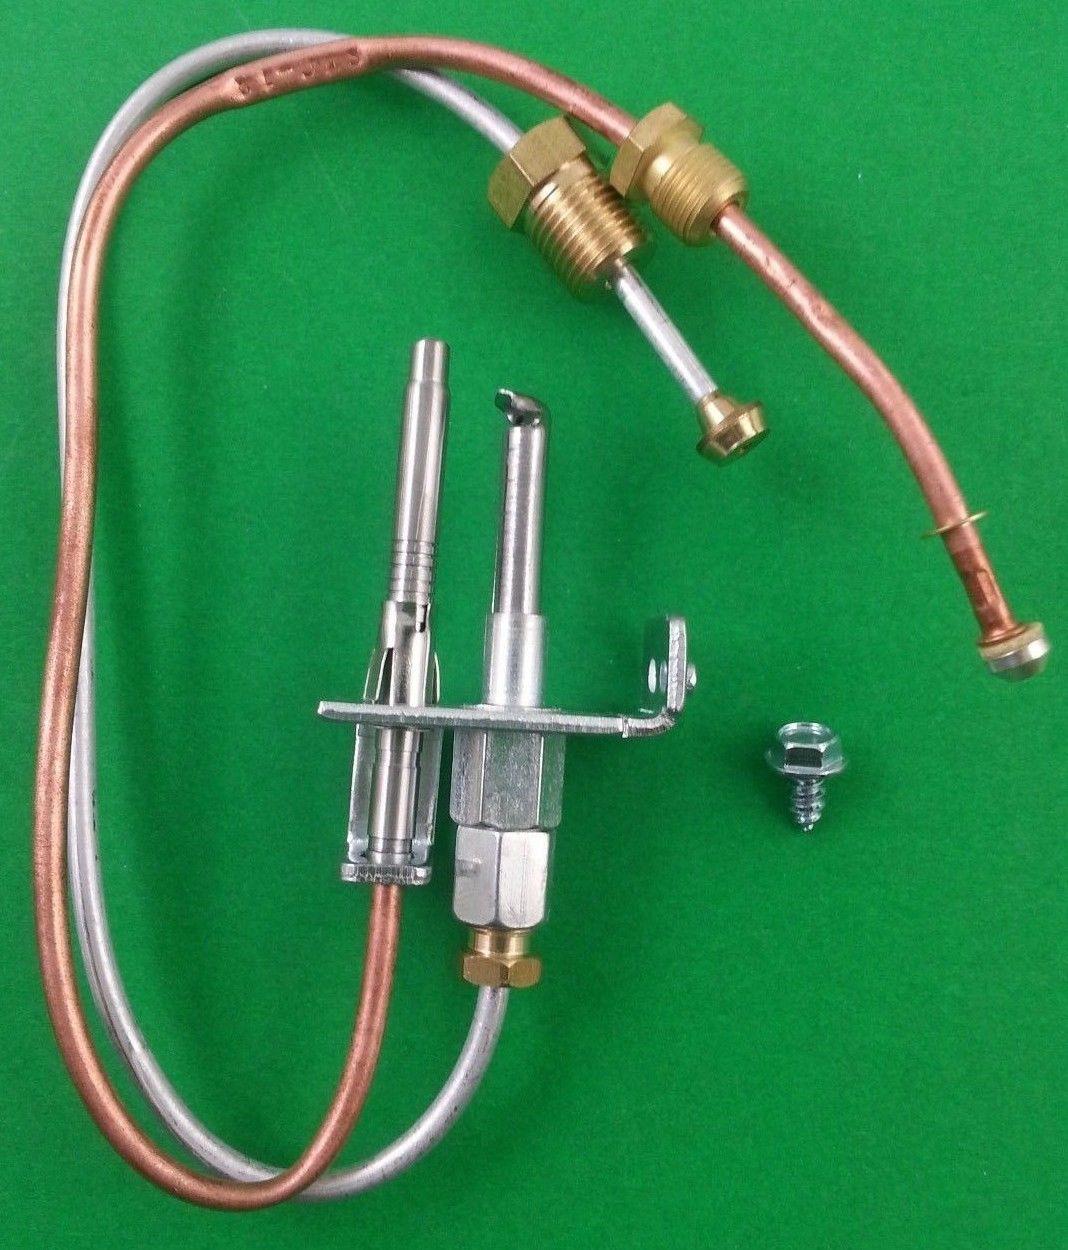 Atwood 92616 RV Water Heater Pilot Thermocouple Assembly 91603 eBay